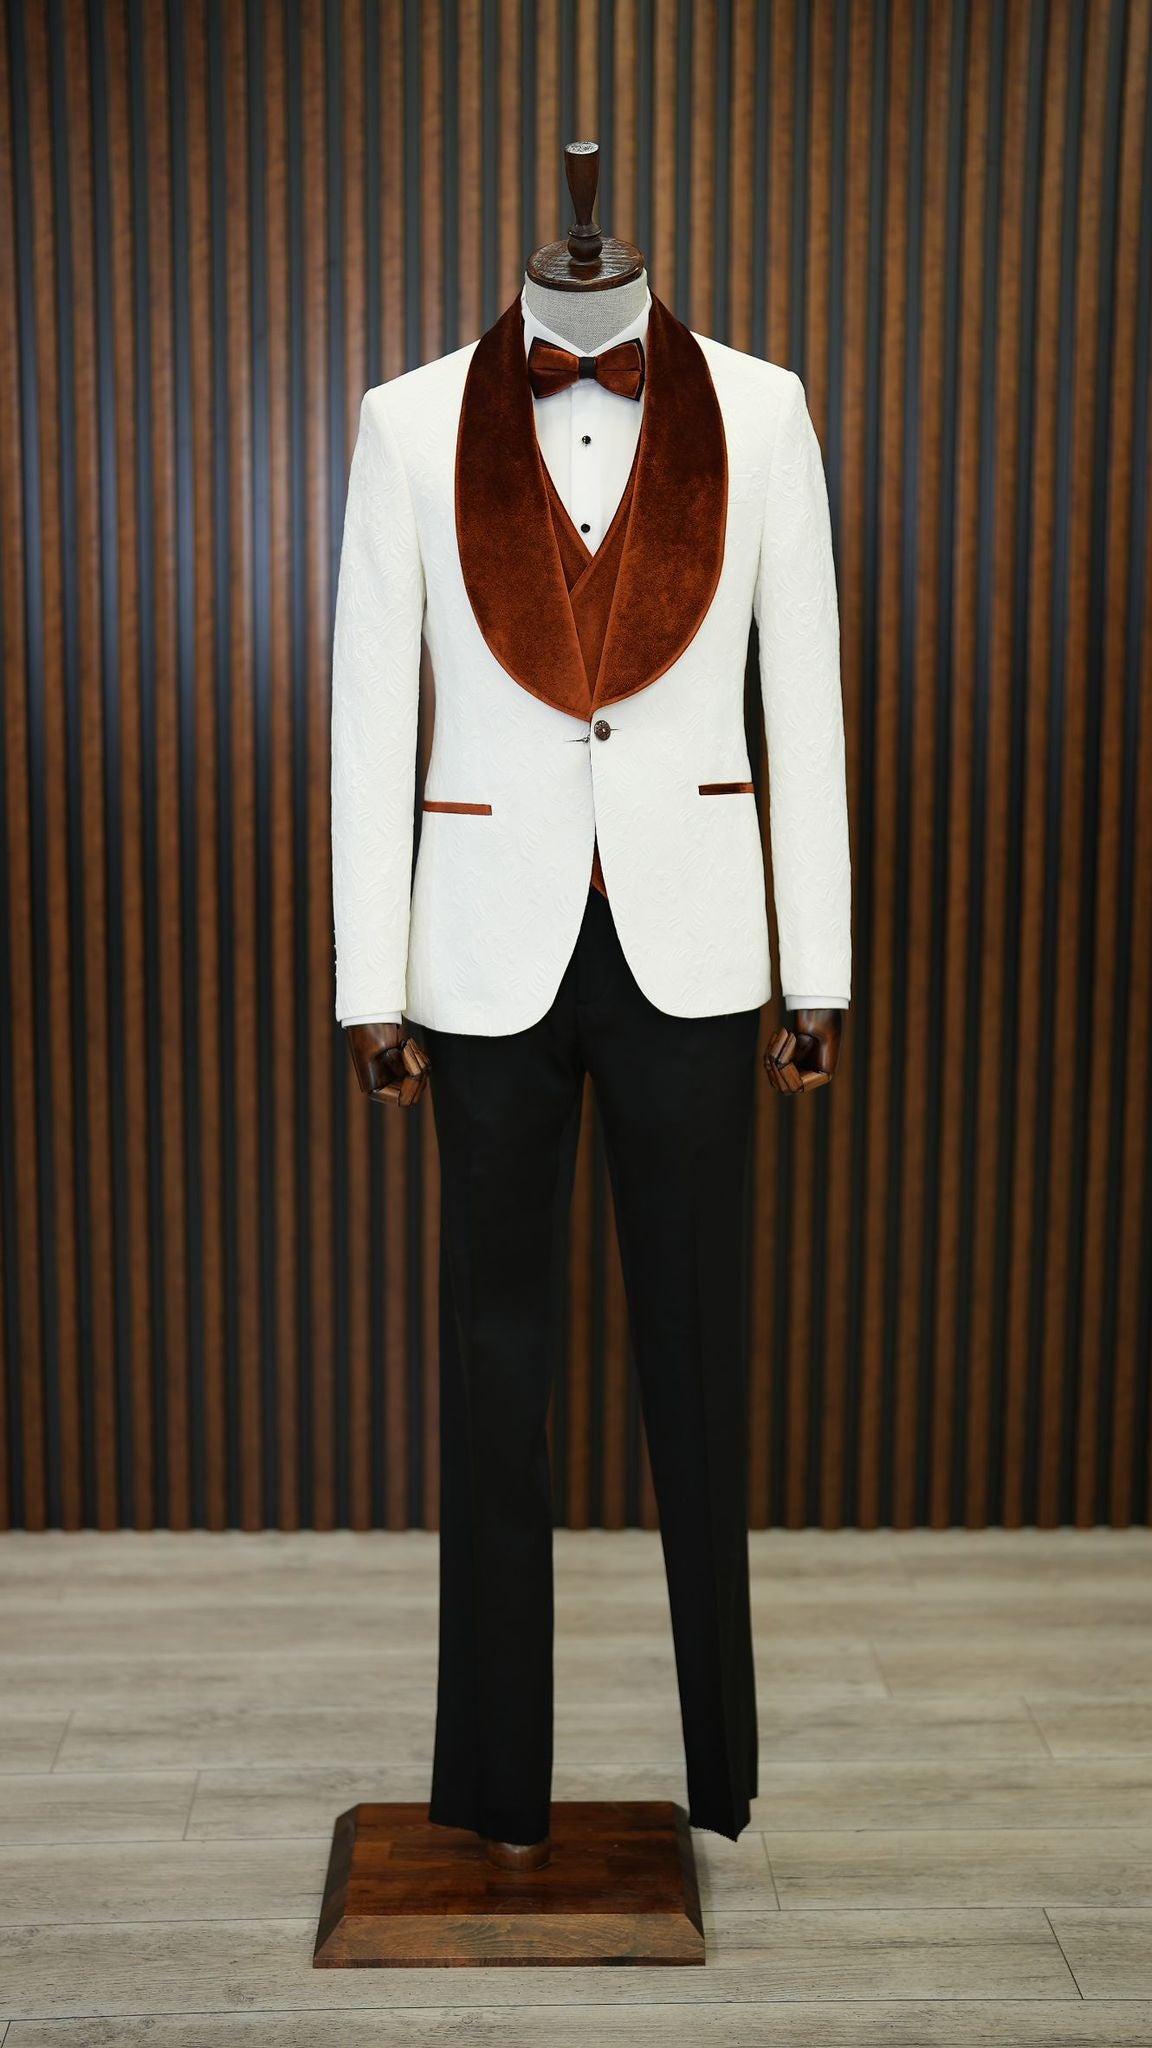 A Brown and White Tuxedo Suit on display.